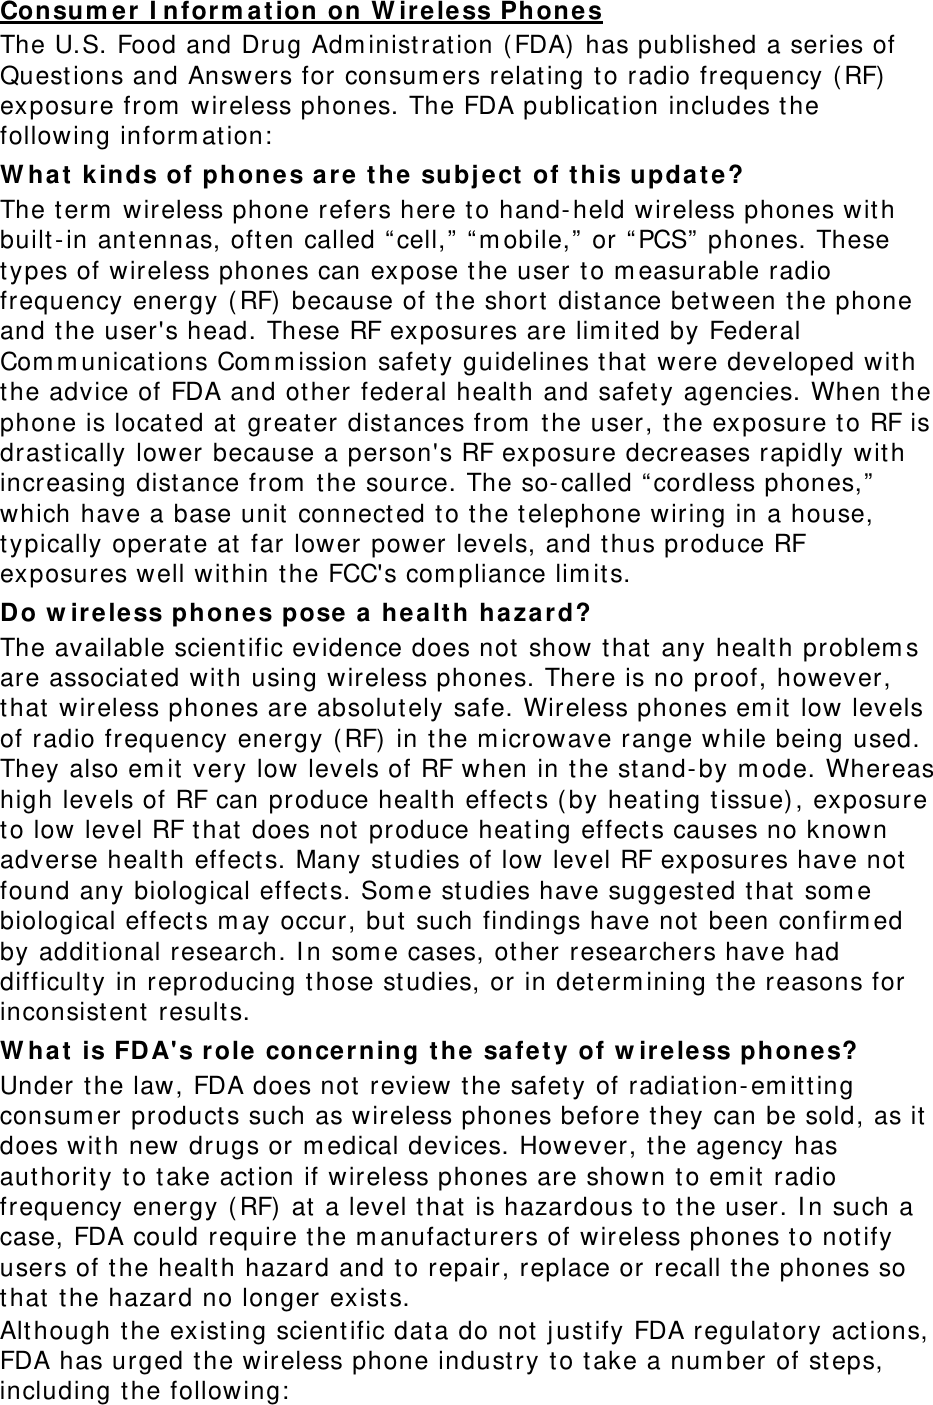 Consum er I nform at ion on W ir e le ss Phones The U.S. Food and Drug Adm inistration ( FDA)  has published a series of Quest ions and Answers for consum ers relating t o radio frequency ( RF) exposure from  wireless phones. The FDA publication includes the following inform ation:  W ha t k in ds of phone s are t he su bj e ct  of t his upda t e? The t erm  wireless phone refers here t o hand- held wireless phones wit h built- in antennas, oft en called “ cell,”  “ m obile,”  or “ PCS”  phones. These types of wireless phones can expose t he user t o m easurable radio frequency energy ( RF)  because of t he short  dist ance between the phone and t he user&apos;s head. These RF exposures are lim ited by Federal Com m unications Com m ission safet y guidelines that were developed wit h the advice of FDA and other federal health and safet y agencies. When t he phone is located at greater distances from  t he user, t he exposure to RF is drast ically lower because a person&apos;s RF exposure decreases rapidly with increasing dist ance from  t he source. The so-called “ cordless phones,”  which have a base unit connect ed t o t he telephone wiring in a house, typically operate at far lower power levels, and t hus produce RF exposures well within t he FCC&apos;s com pliance lim it s. Do w irele ss phones pose  a healt h  hazard? The available scient ific evidence does not show t hat any health problem s are associated with using wireless phones. There is no proof, however, that  wireless phones are absolut ely safe. Wireless phones em it low levels of radio frequency energy ( RF)  in the m icrowave range while being used. They also em it very low levels of RF when in t he stand- by m ode. Whereas high levels of RF can produce health effect s ( by heating t issue), exposure to low level RF t hat does not produce heat ing effect s causes no known adverse health effect s. Many studies of low level RF exposures have not found any biological effect s. Som e studies have suggest ed t hat som e biological effect s m ay occur, but  such findings have not been confirm ed by additional research. I n som e cases, other researchers have had difficulty in reproducing t hose studies, or in determ ining the reasons for inconsist ent results. W ha t is FDA&apos;s role  concerning t he  sa fe t y of w ire le ss phones? Under t he law, FDA does not review the safety of radiat ion- em itt ing consum er products such as wireless phones before they can be sold, as it does with new drugs or m edical devices. However, t he agency has aut hority t o t ake act ion if wireless phones are shown t o em it radio frequency energy ( RF)  at a level t hat is hazardous t o t he user. I n such a case, FDA could require the m anufact urers of w ireless phones t o notify users of t he health hazard and t o repair, replace or recall t he phones so that  t he hazard no longer exist s. Alt hough t he exist ing scient ific data do not j ust ify FDA regulat ory act ions, FDA has urged the wireless phone industry t o t ake a num ber of st eps, including the following:  